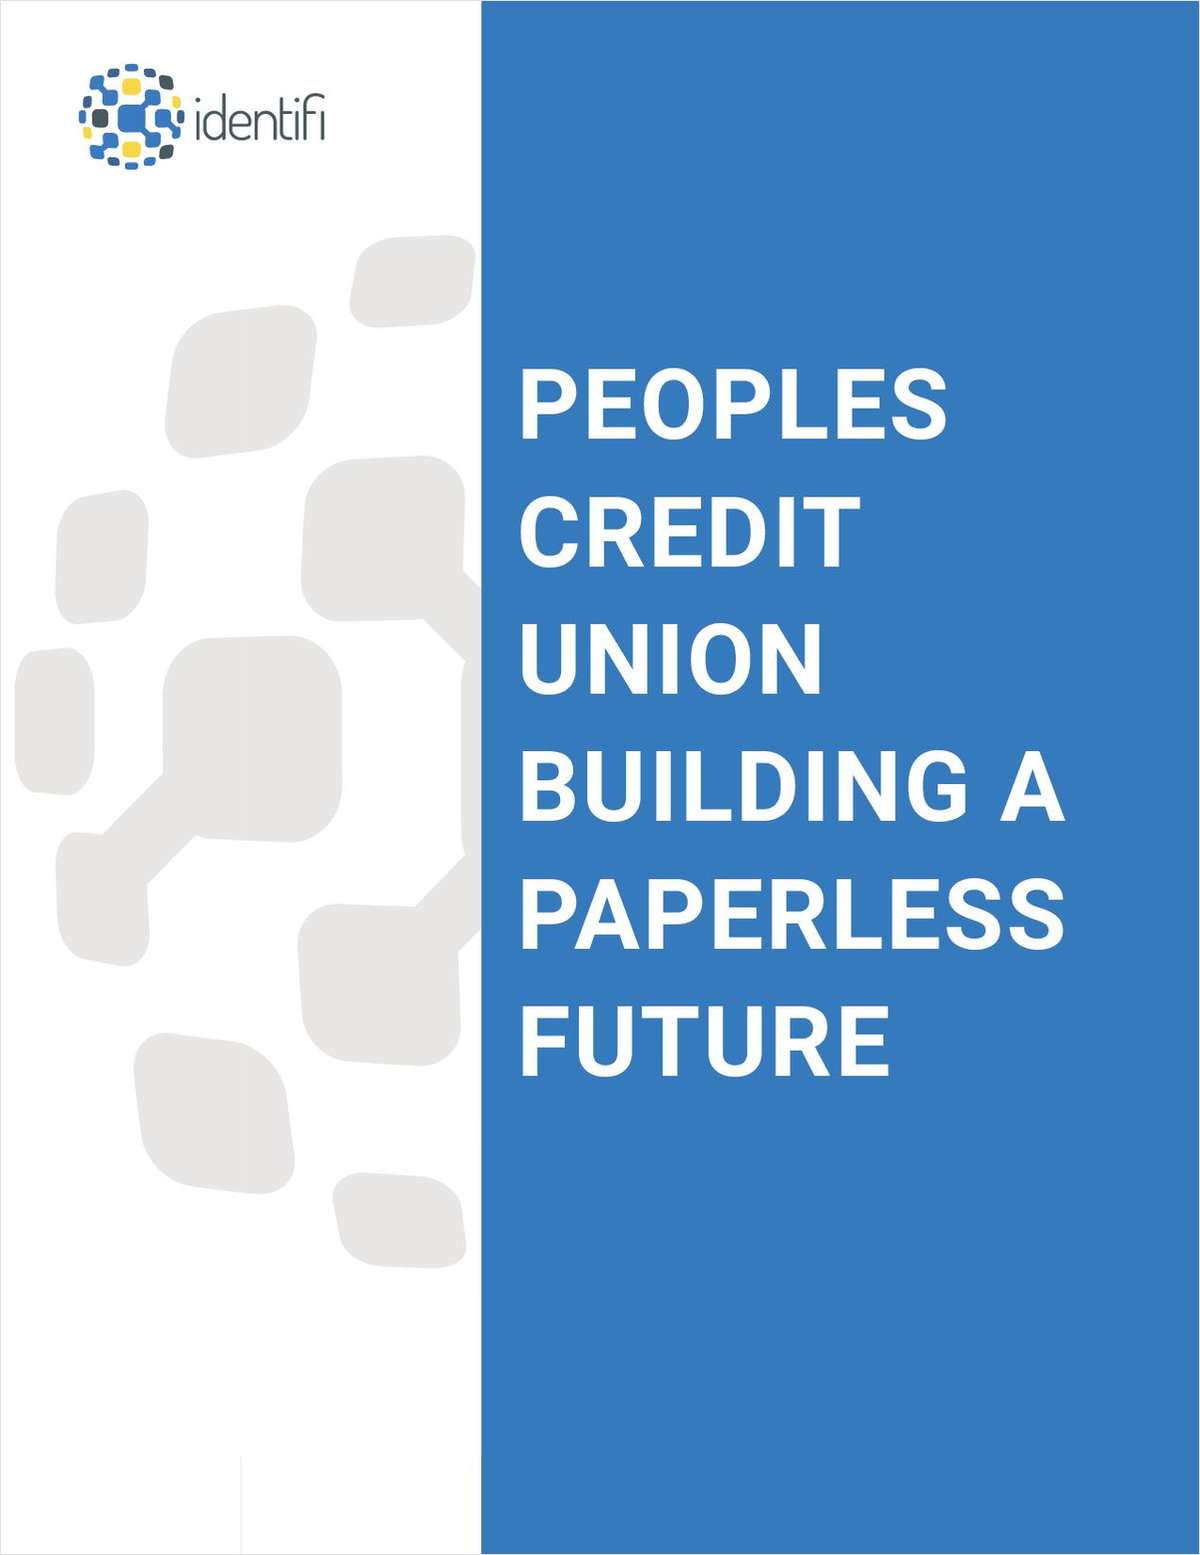 How People's Credit Union is Building a Paperless Future